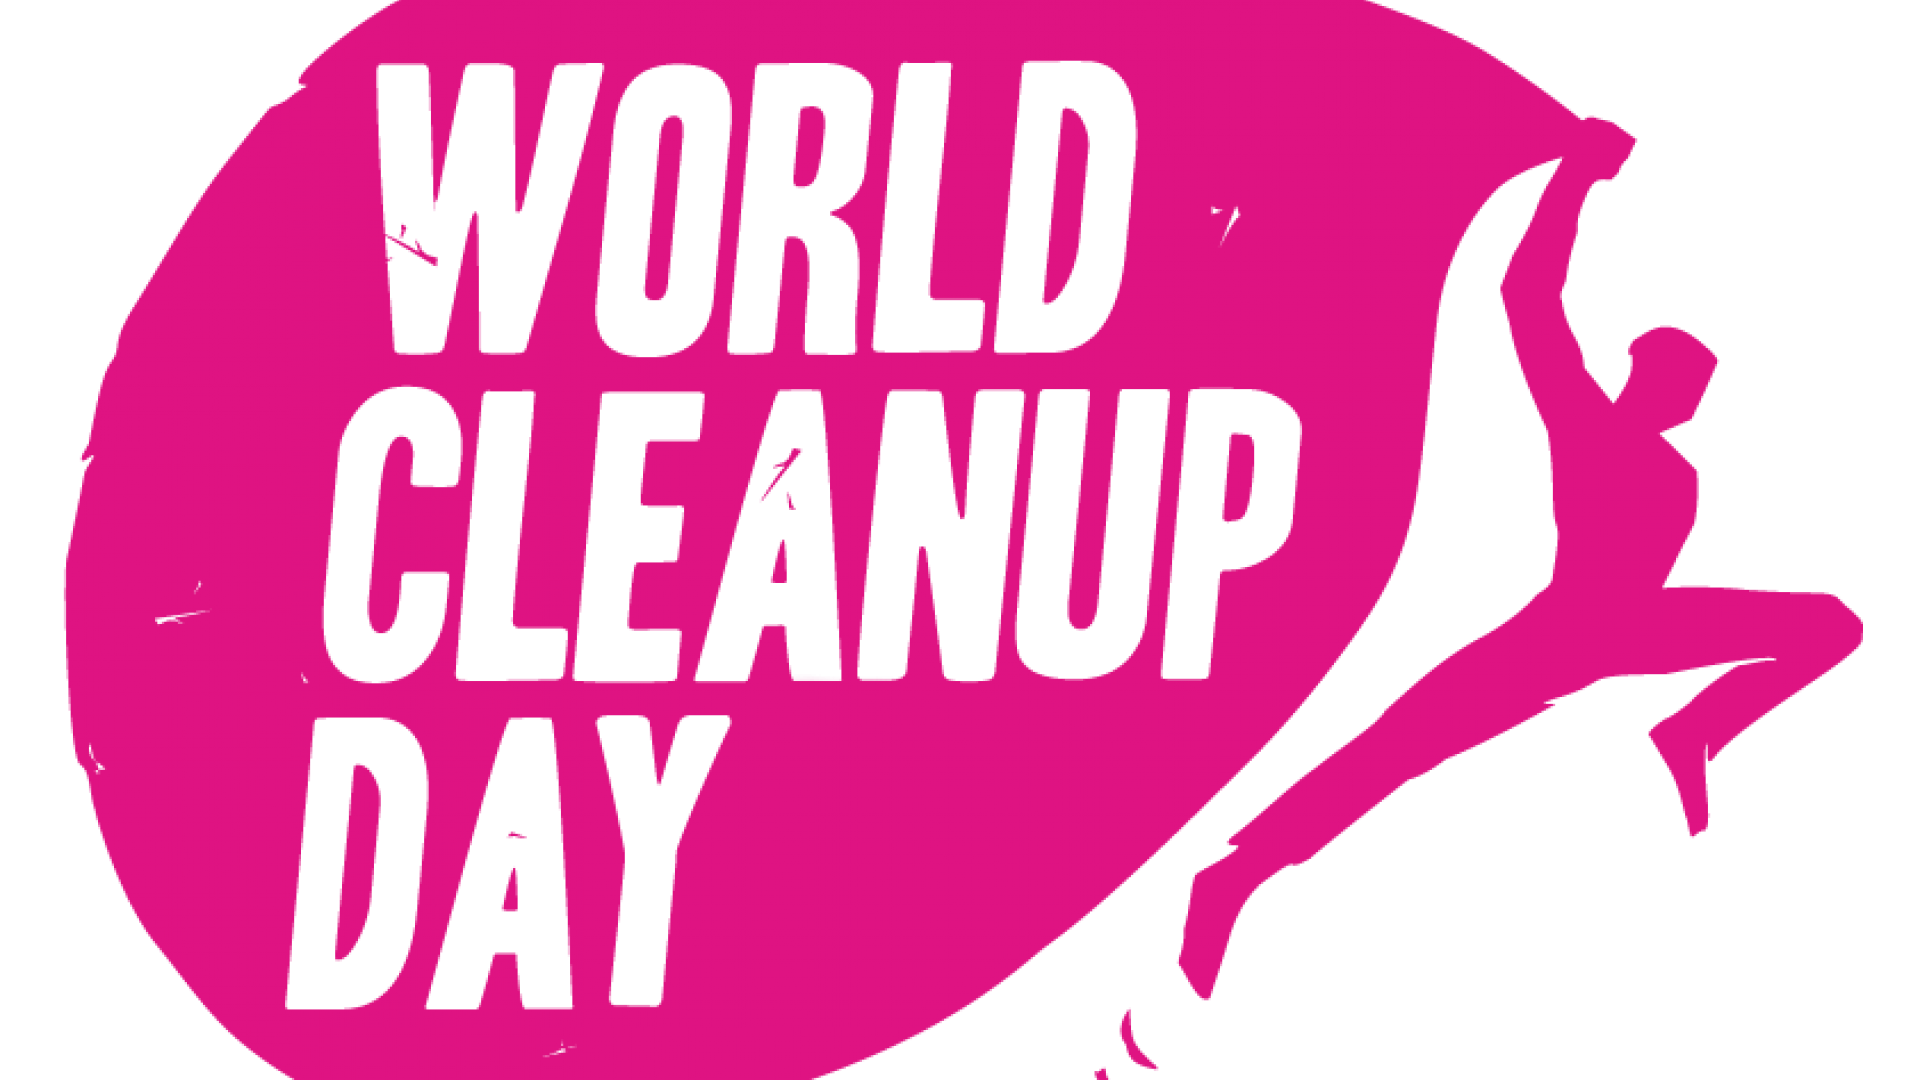 Logo world cleanup day